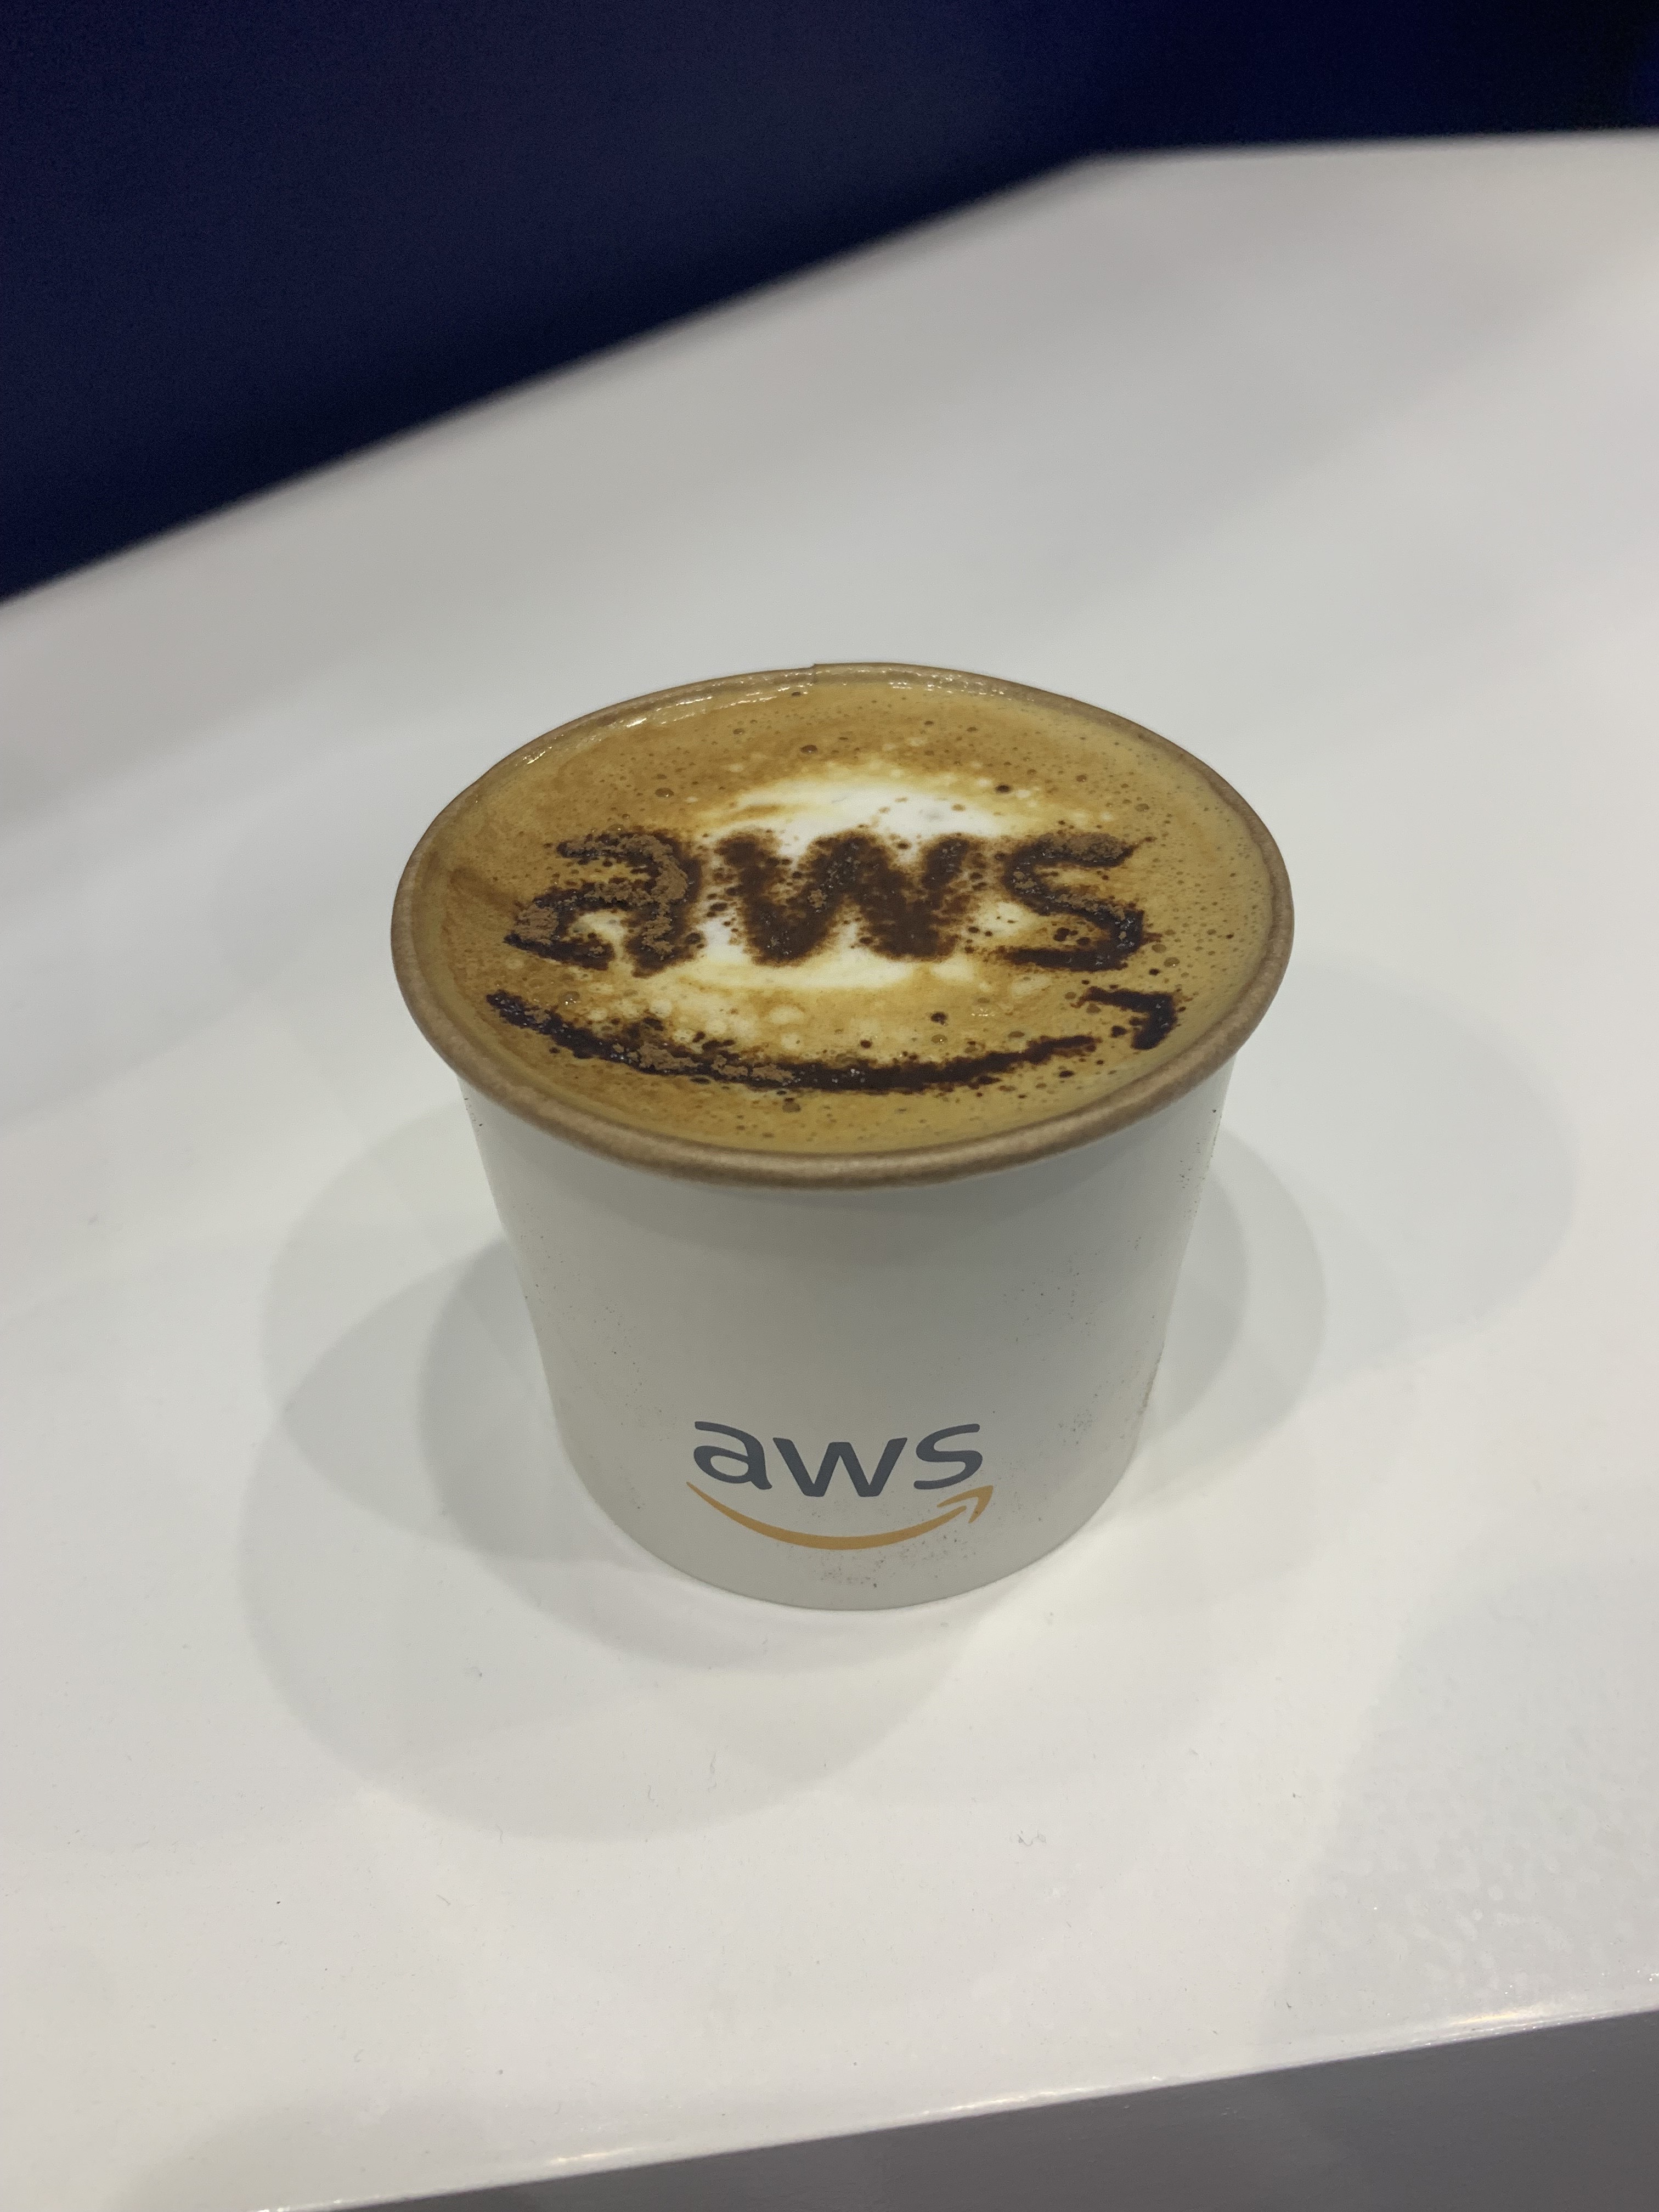 My cappuccino by AWS